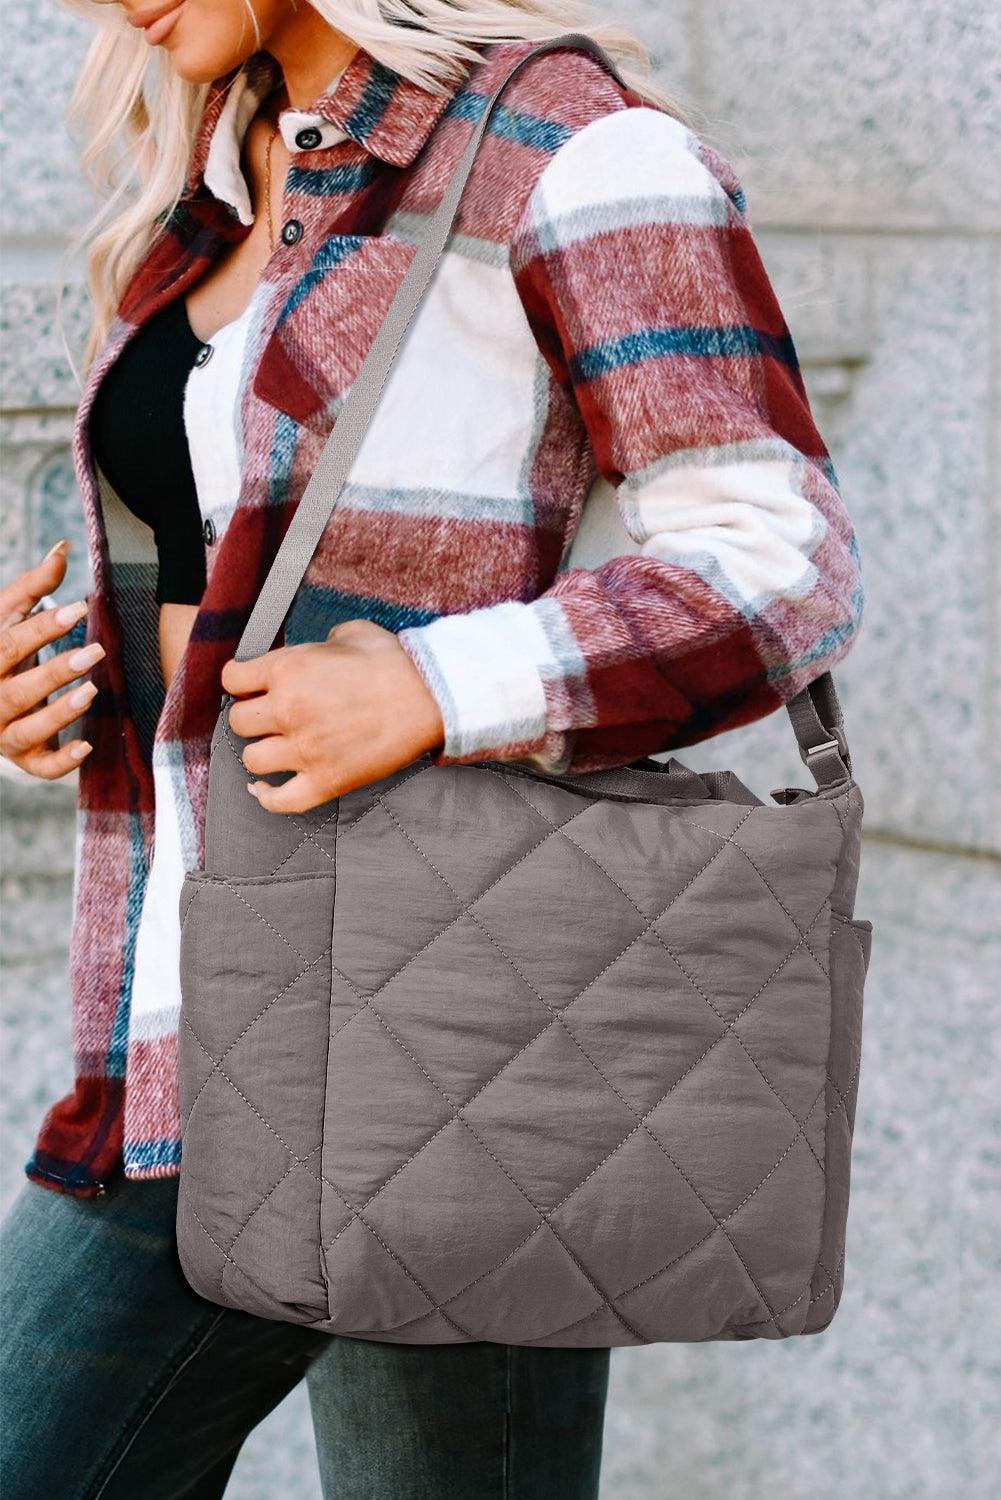 Dark Grey Quilted Zipped Large Capacity Shoulder Bag